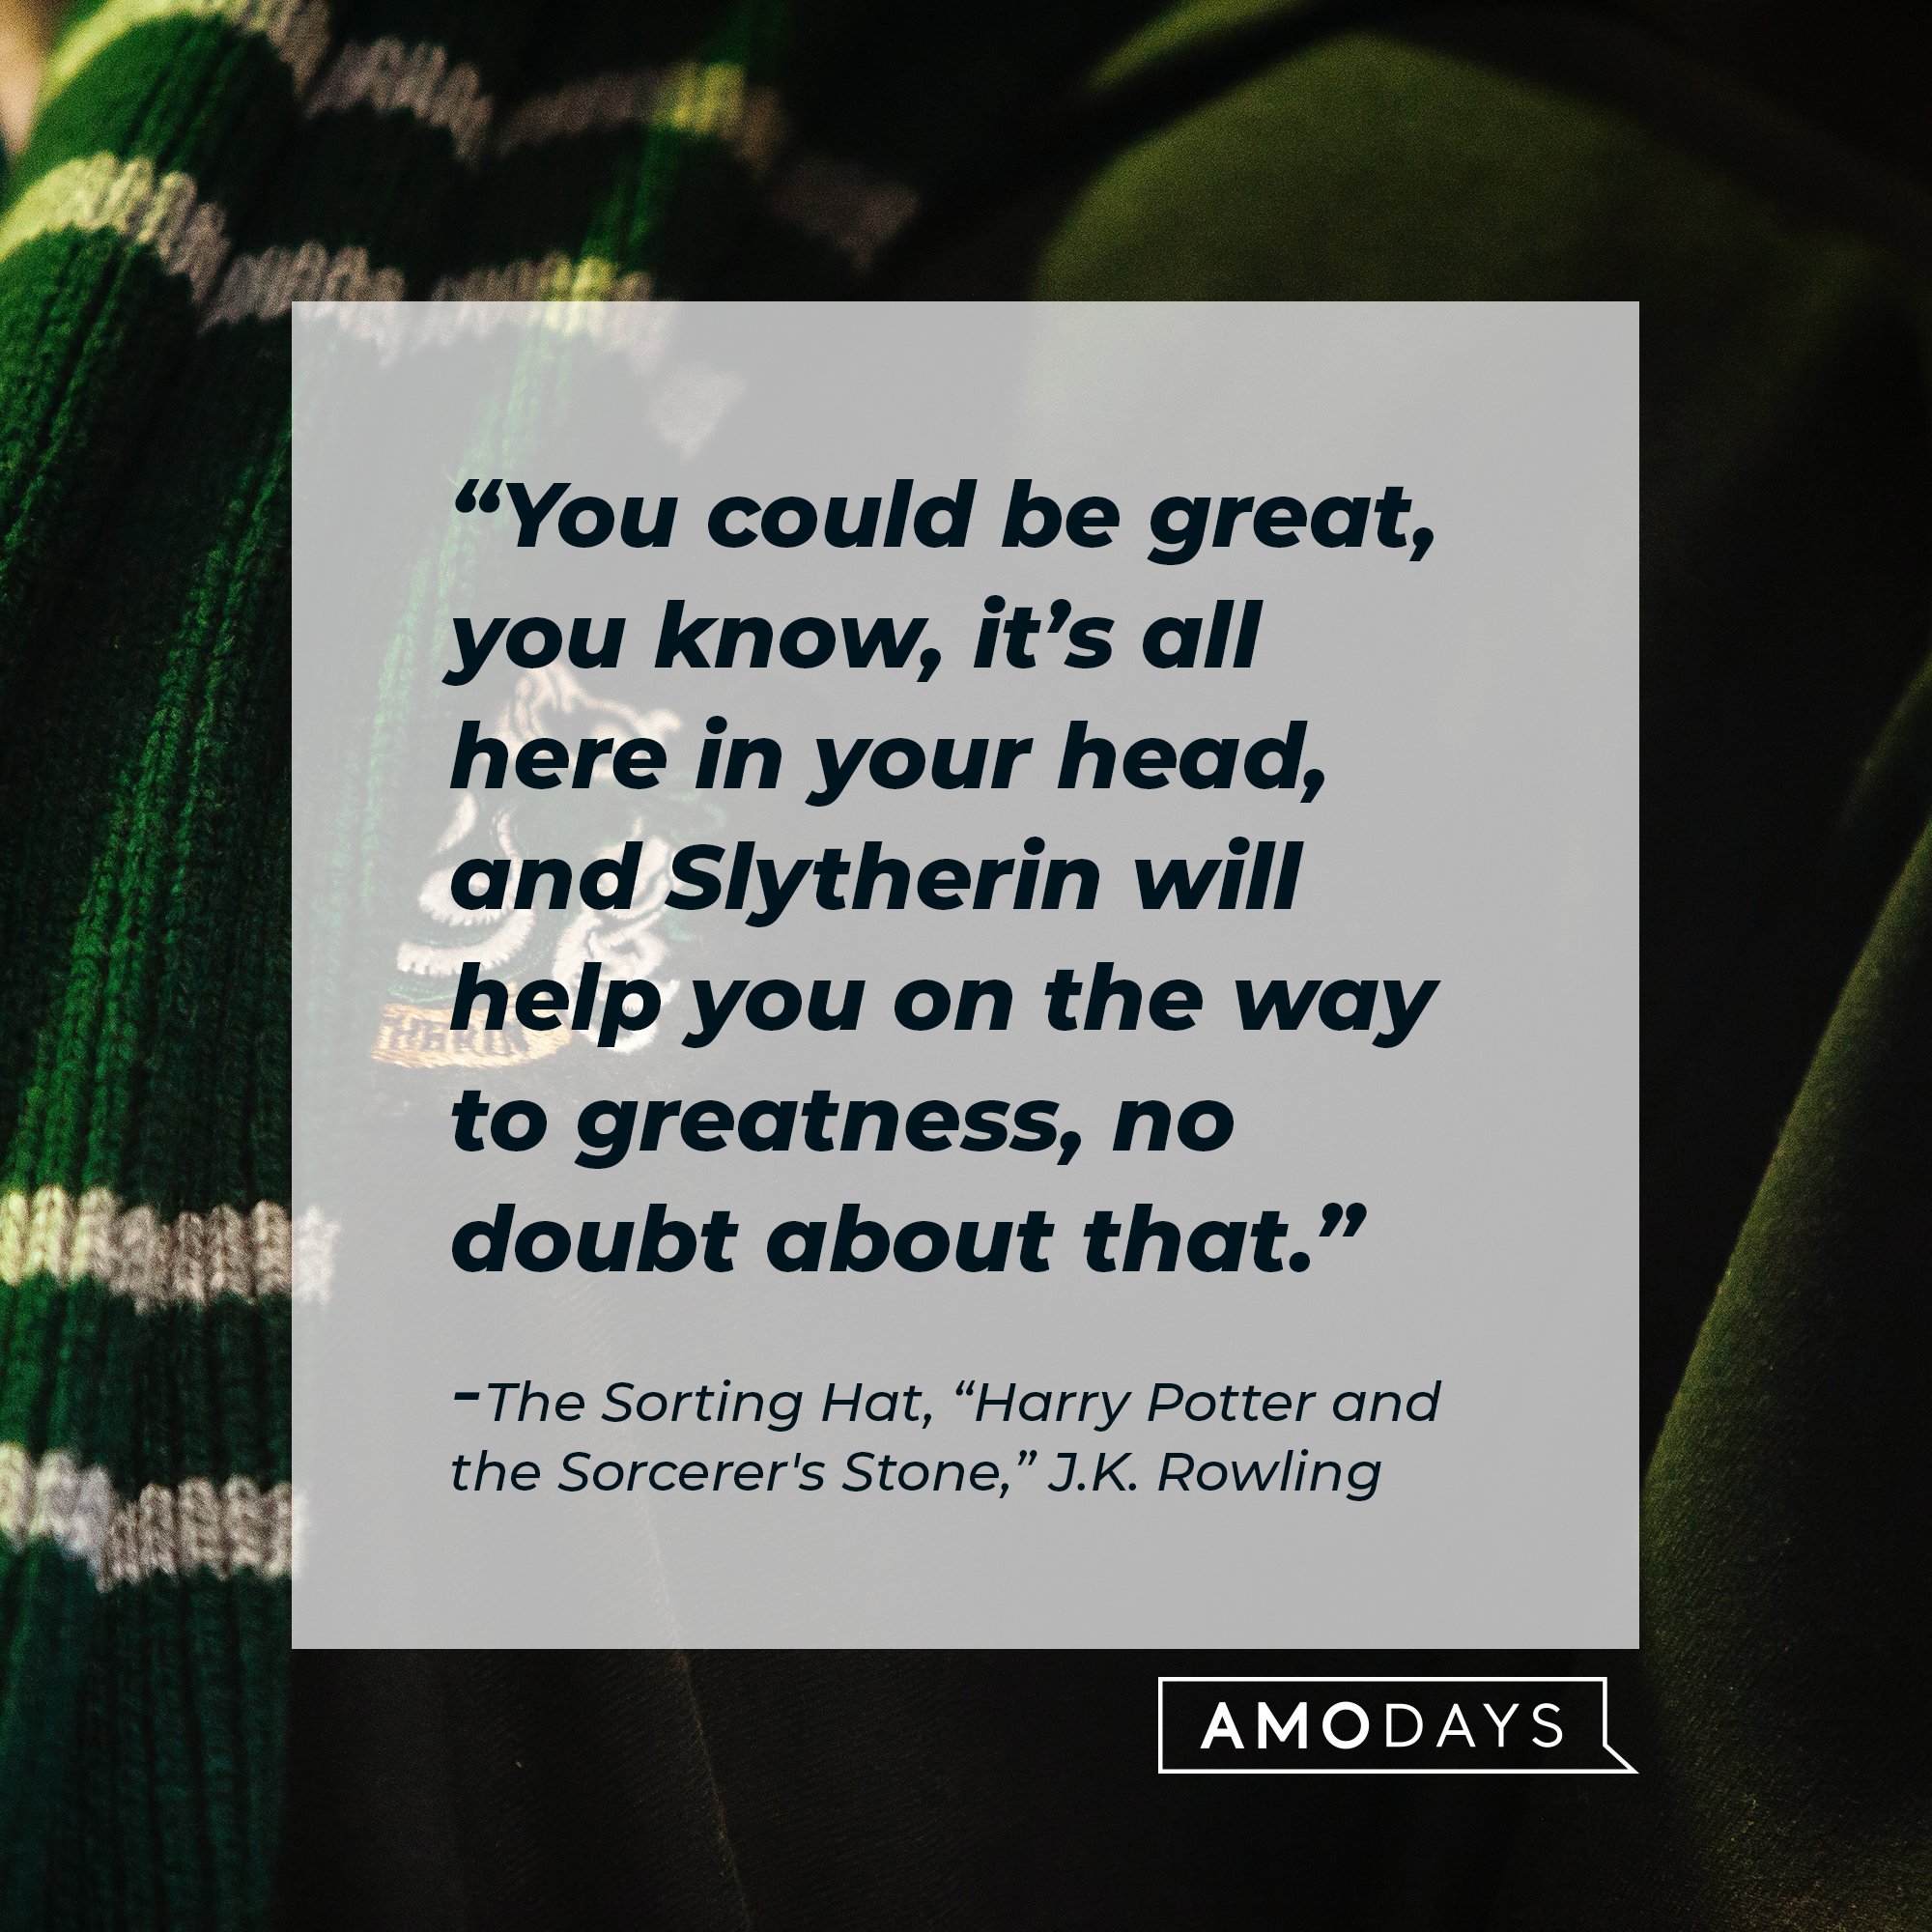 The Sorting Hat’s quote from “Harry Potter and the Sorcerer's Stone”: “You could be great, you know, it’s all here in your head, and Slytherin will help you on the way to greatness, no doubt about that.” | Image: AmoDays